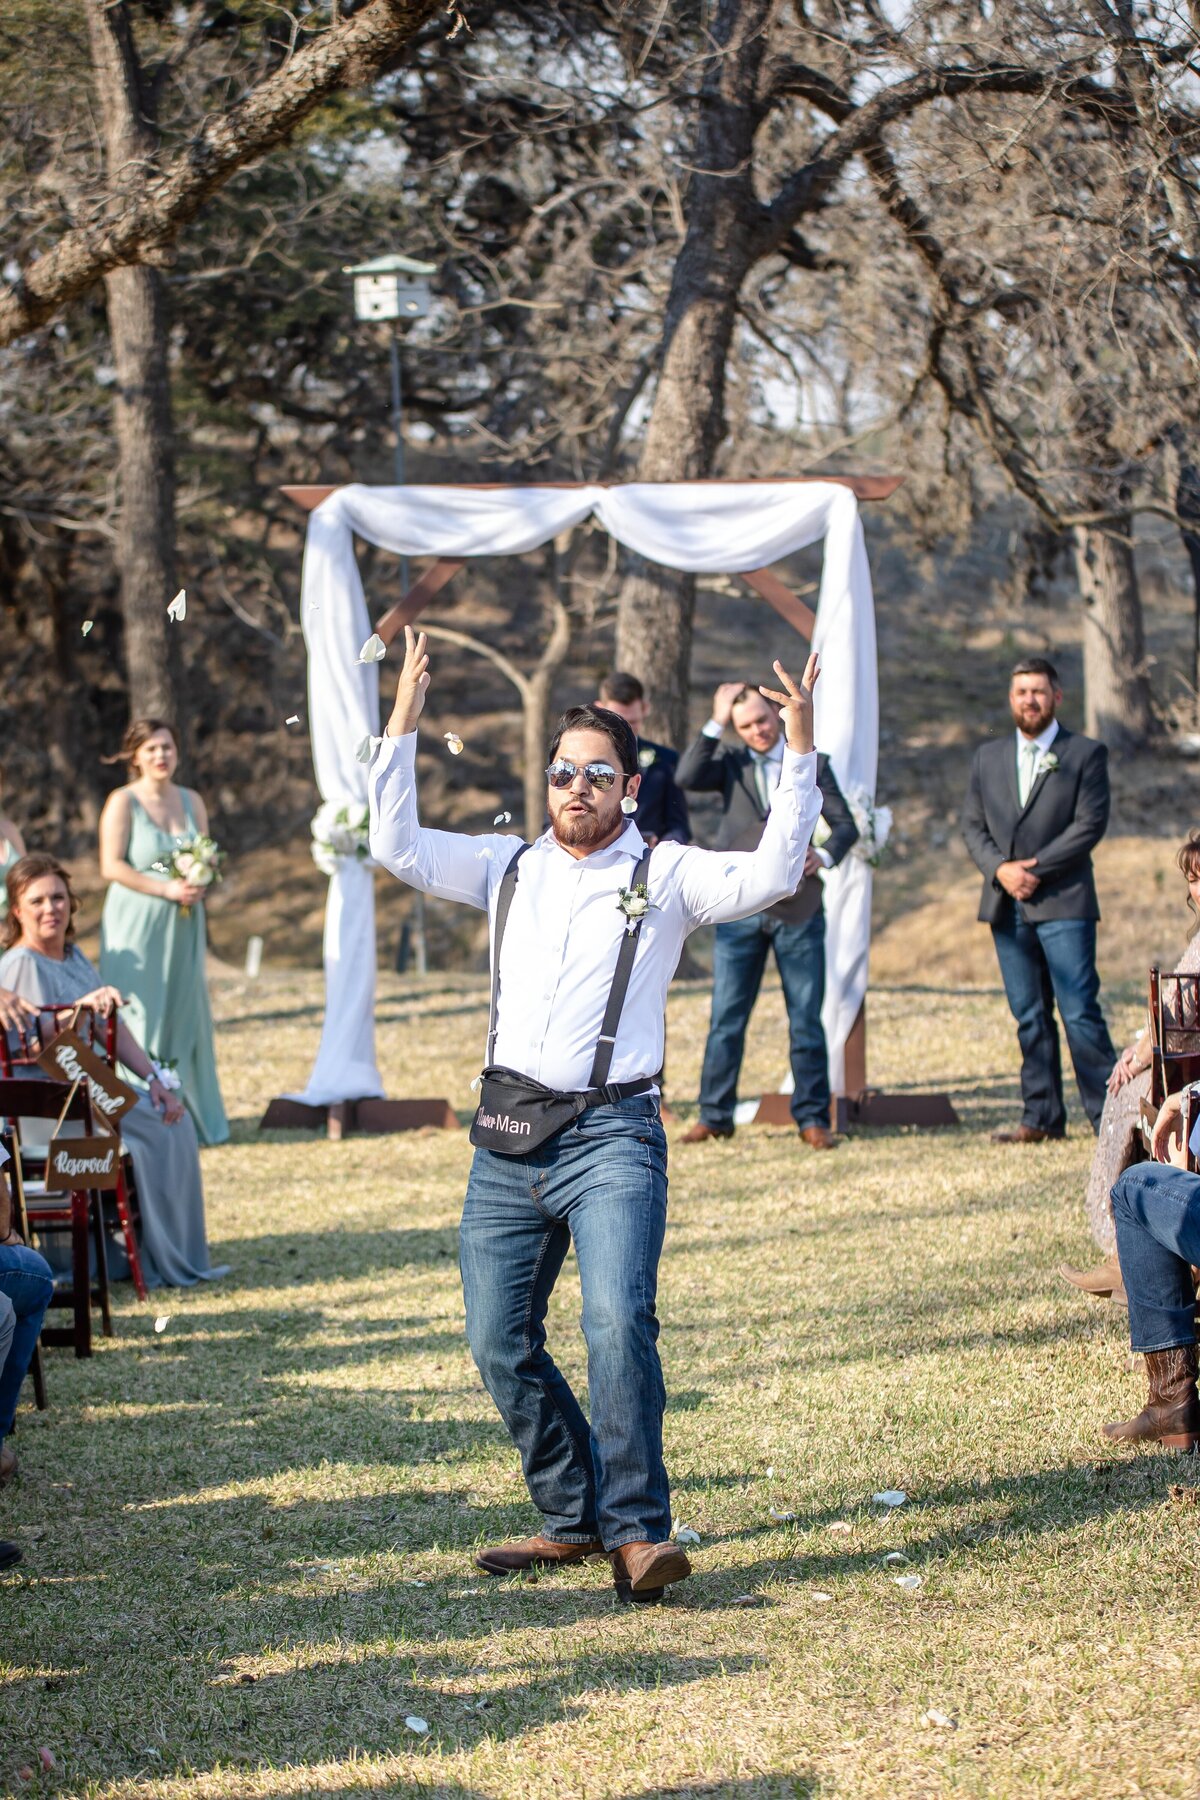 flower man tosses petals into the air down aisle at Boerne Texas wedding